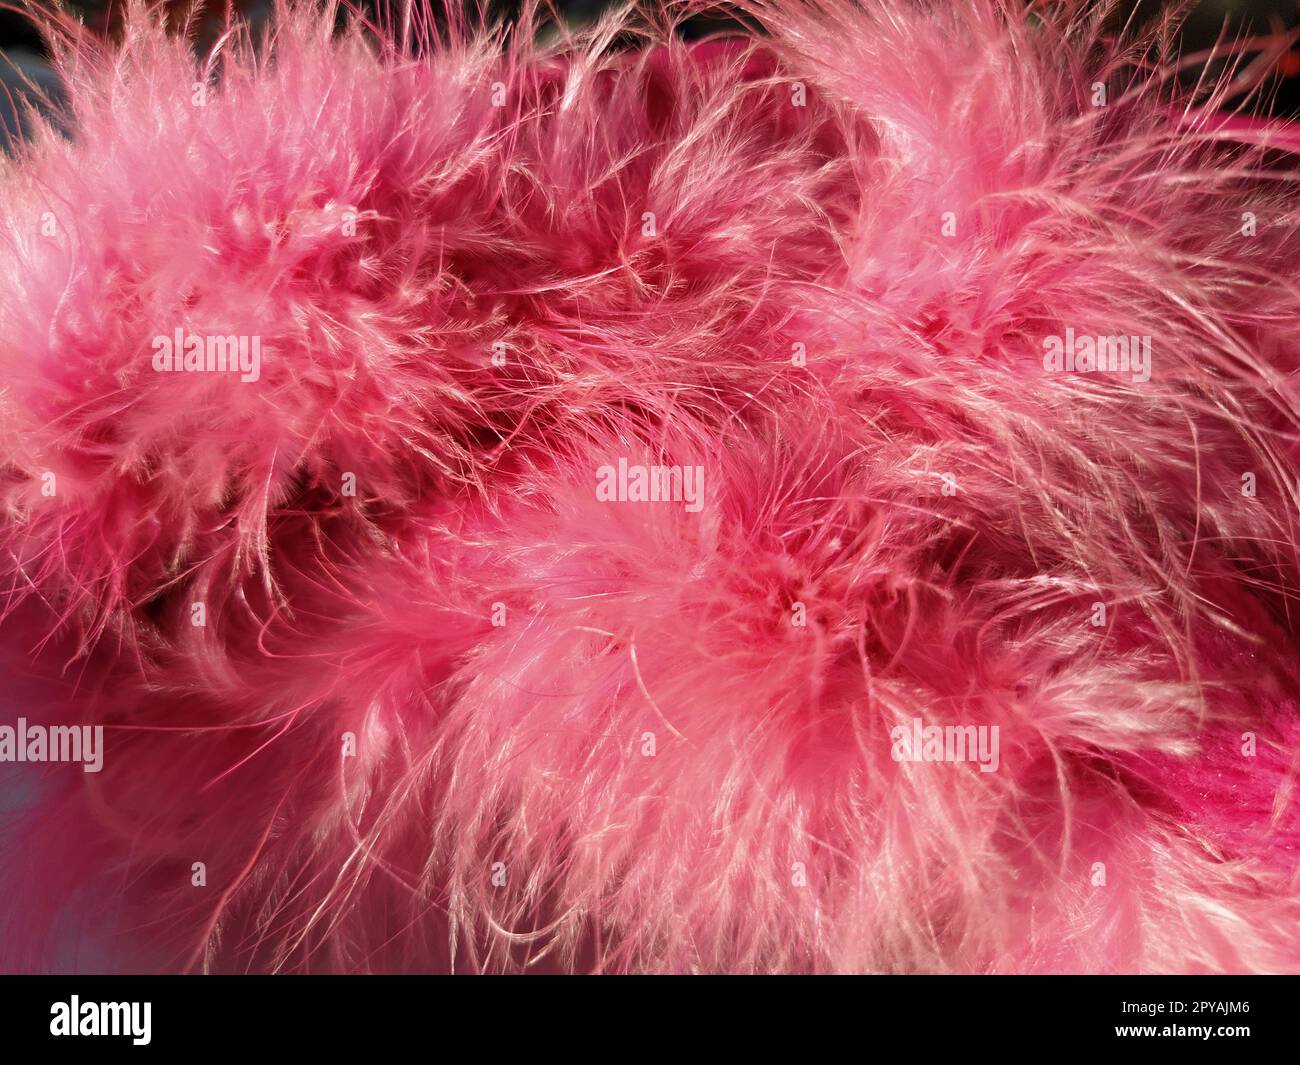 Pink faux fur or pink colored natural bird feathers close-up. Light feathers boa. Delicate texture. Greeting card Happy Valentines Day. Collar from a women's or girl's jacket. Bright pink or color. Stock Photo